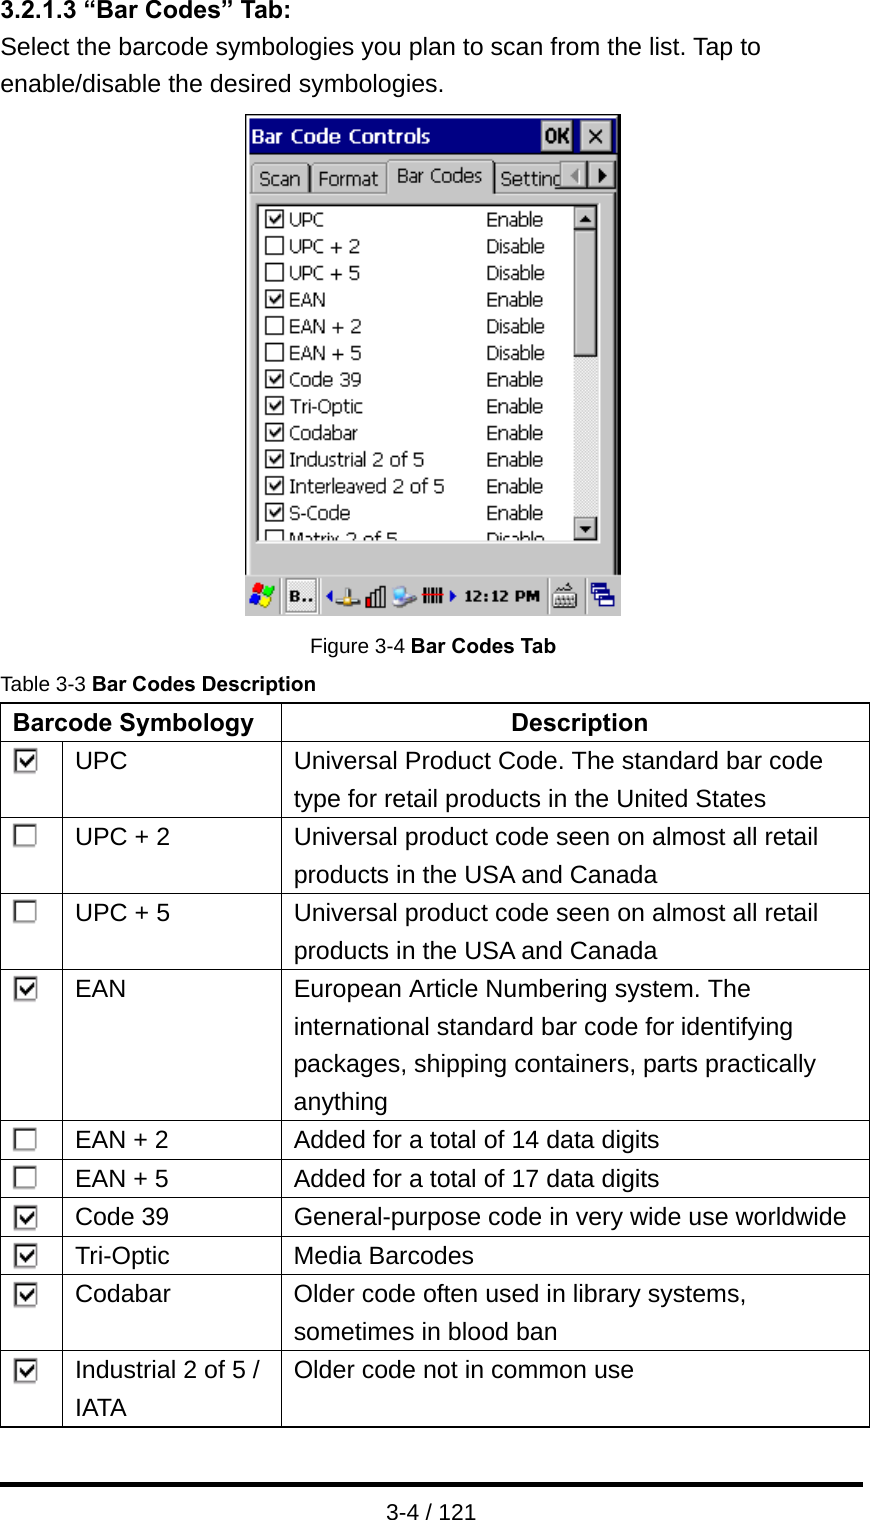  3-4 / 121 3.2.1.3 “Bar Codes” Tab: Select the barcode symbologies you plan to scan from the list. Tap to enable/disable the desired symbologies.  Figure 3-4 Bar Codes Tab Table 3-3 Bar Codes Description Barcode Symbology  Description  UPC Universal Product Code. The standard bar code type for retail products in the United States  UPC + 2 Universal product code seen on almost all retail products in the USA and Canada  UPC + 5 Universal product code seen on almost all retail products in the USA and Canada  EAN European Article Numbering system. The international standard bar code for identifying packages, shipping containers, parts practically anything  EAN + 2 Added for a total of 14 data digits  EAN + 5 Added for a total of 17 data digits  Code 39 General-purpose code in very wide use worldwide  Tri-Optic Media Barcodes  Codabar  Older code often used in library systems, sometimes in blood ban  Industrial 2 of 5 / IATA Older code not in common use 